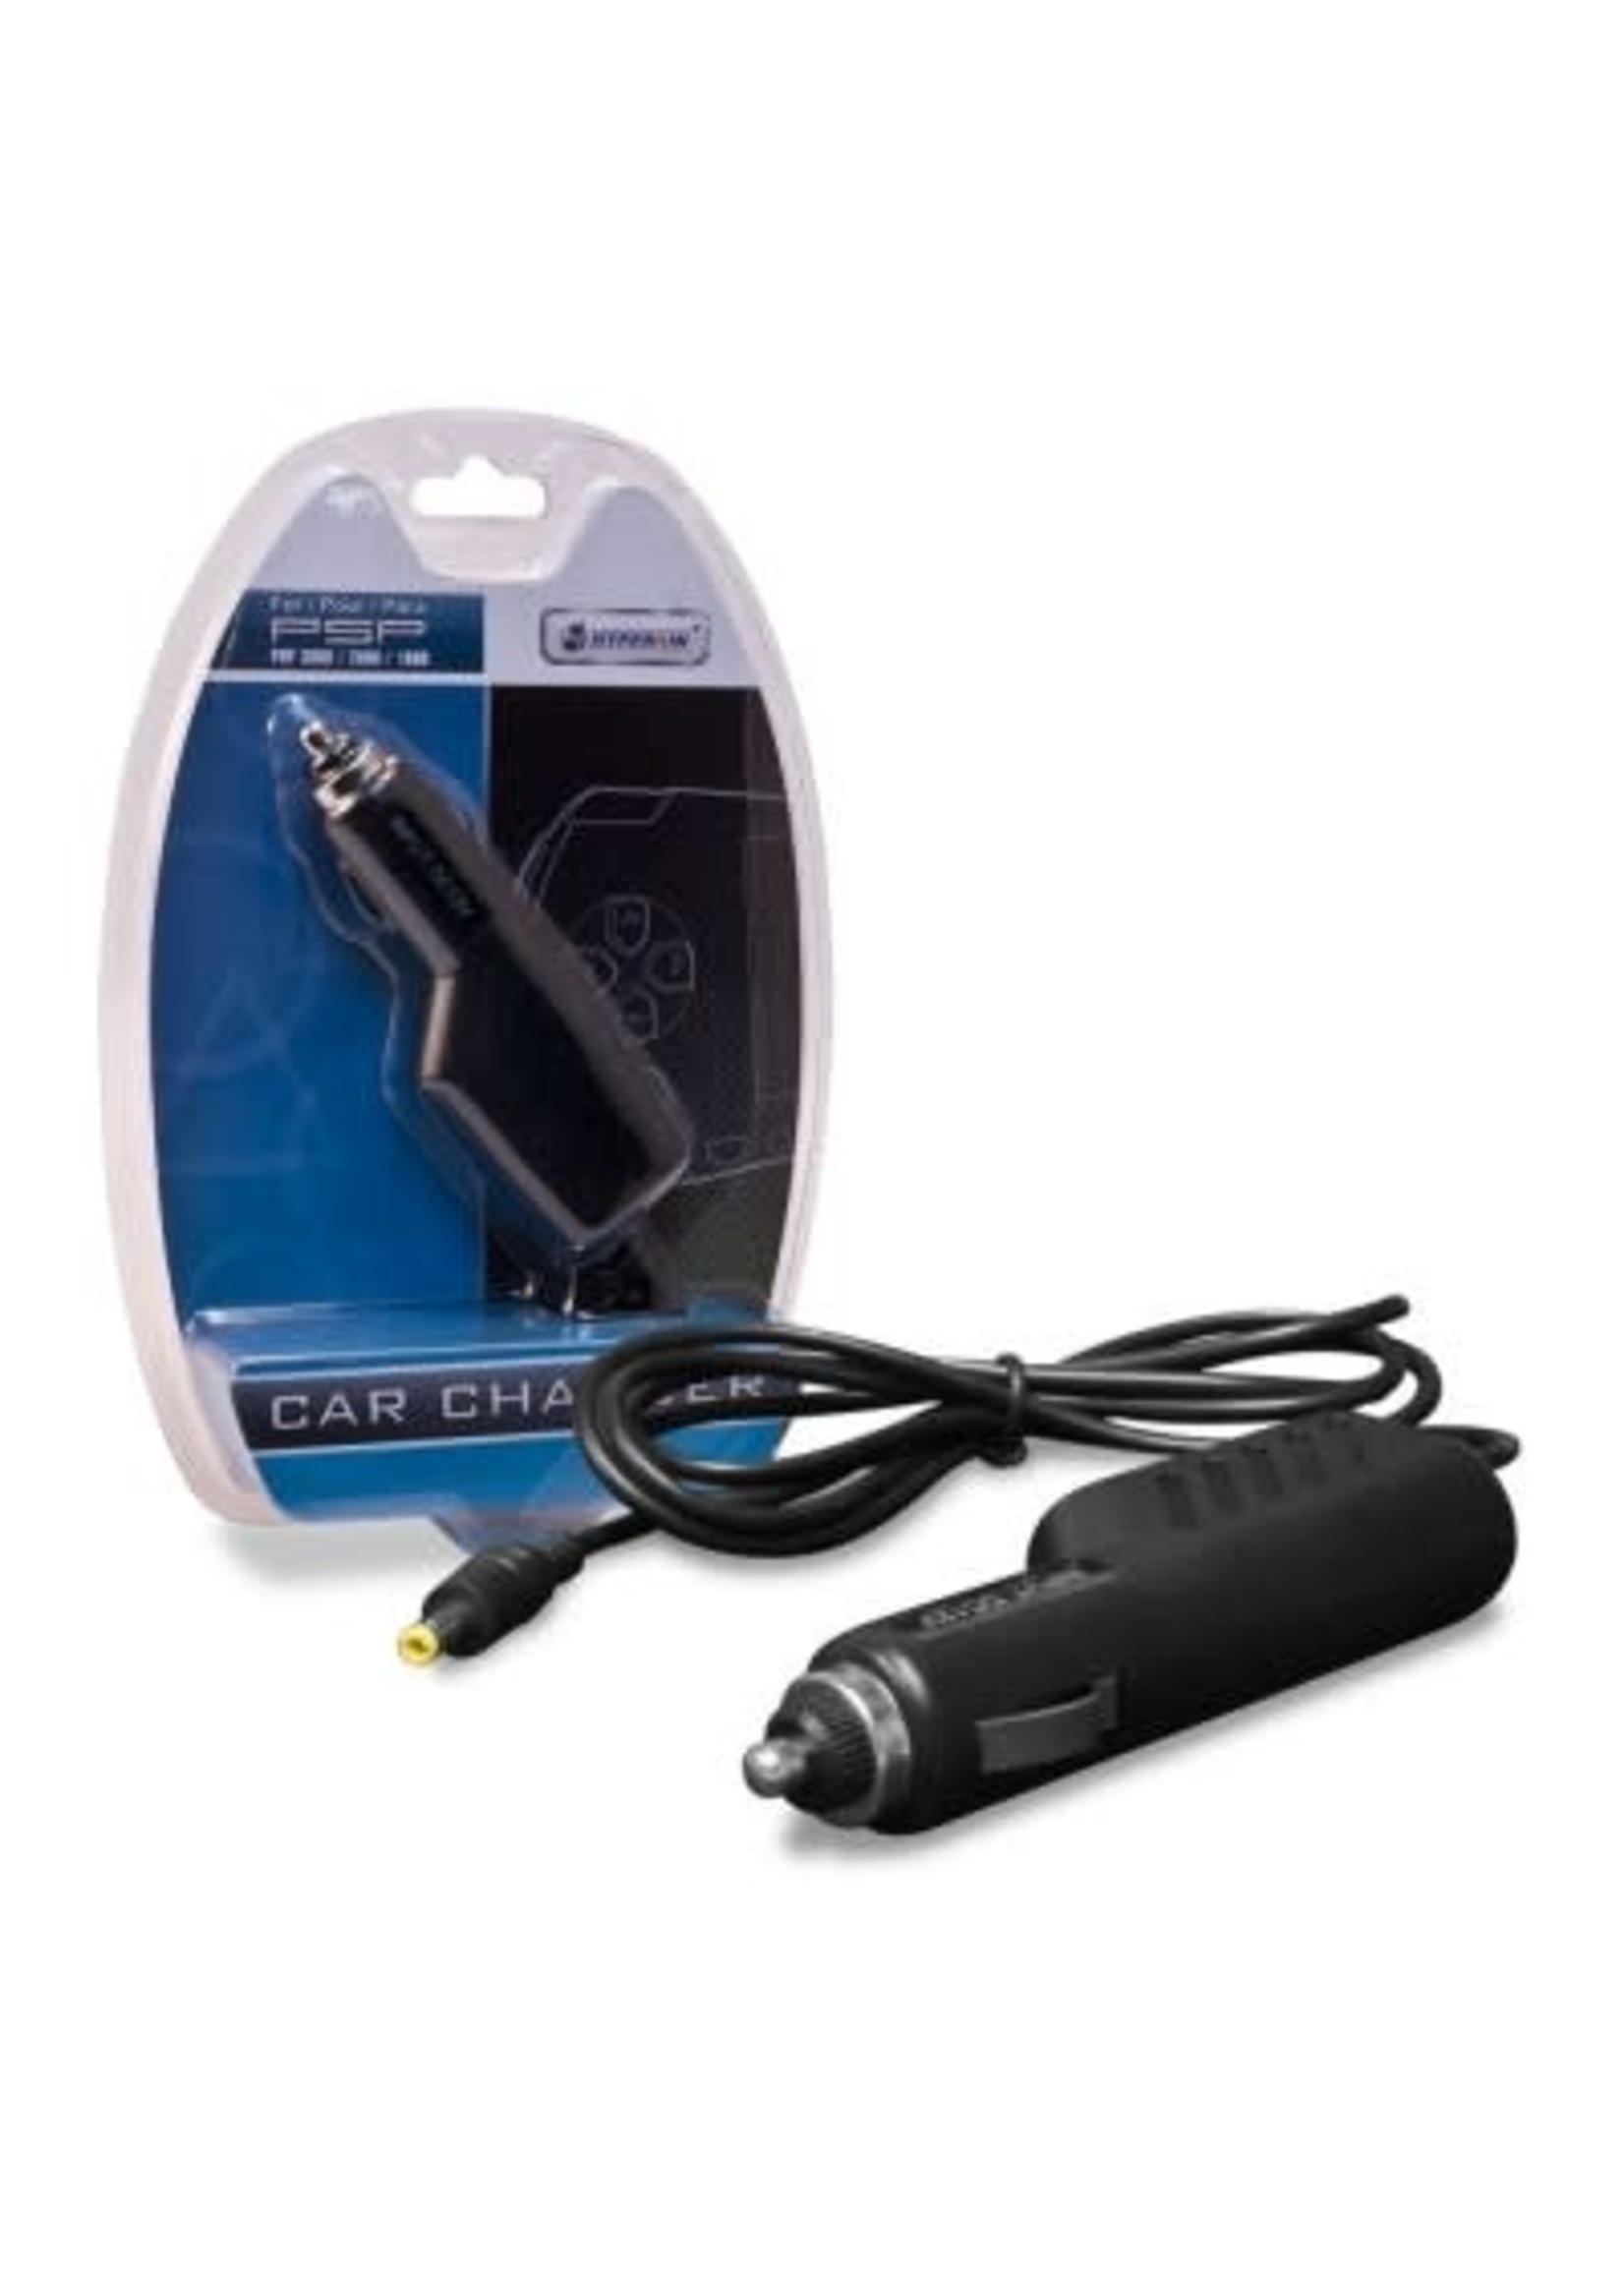 Sony Playstation Portable (PSP) PSP 1000/2000/3000 Car Charger